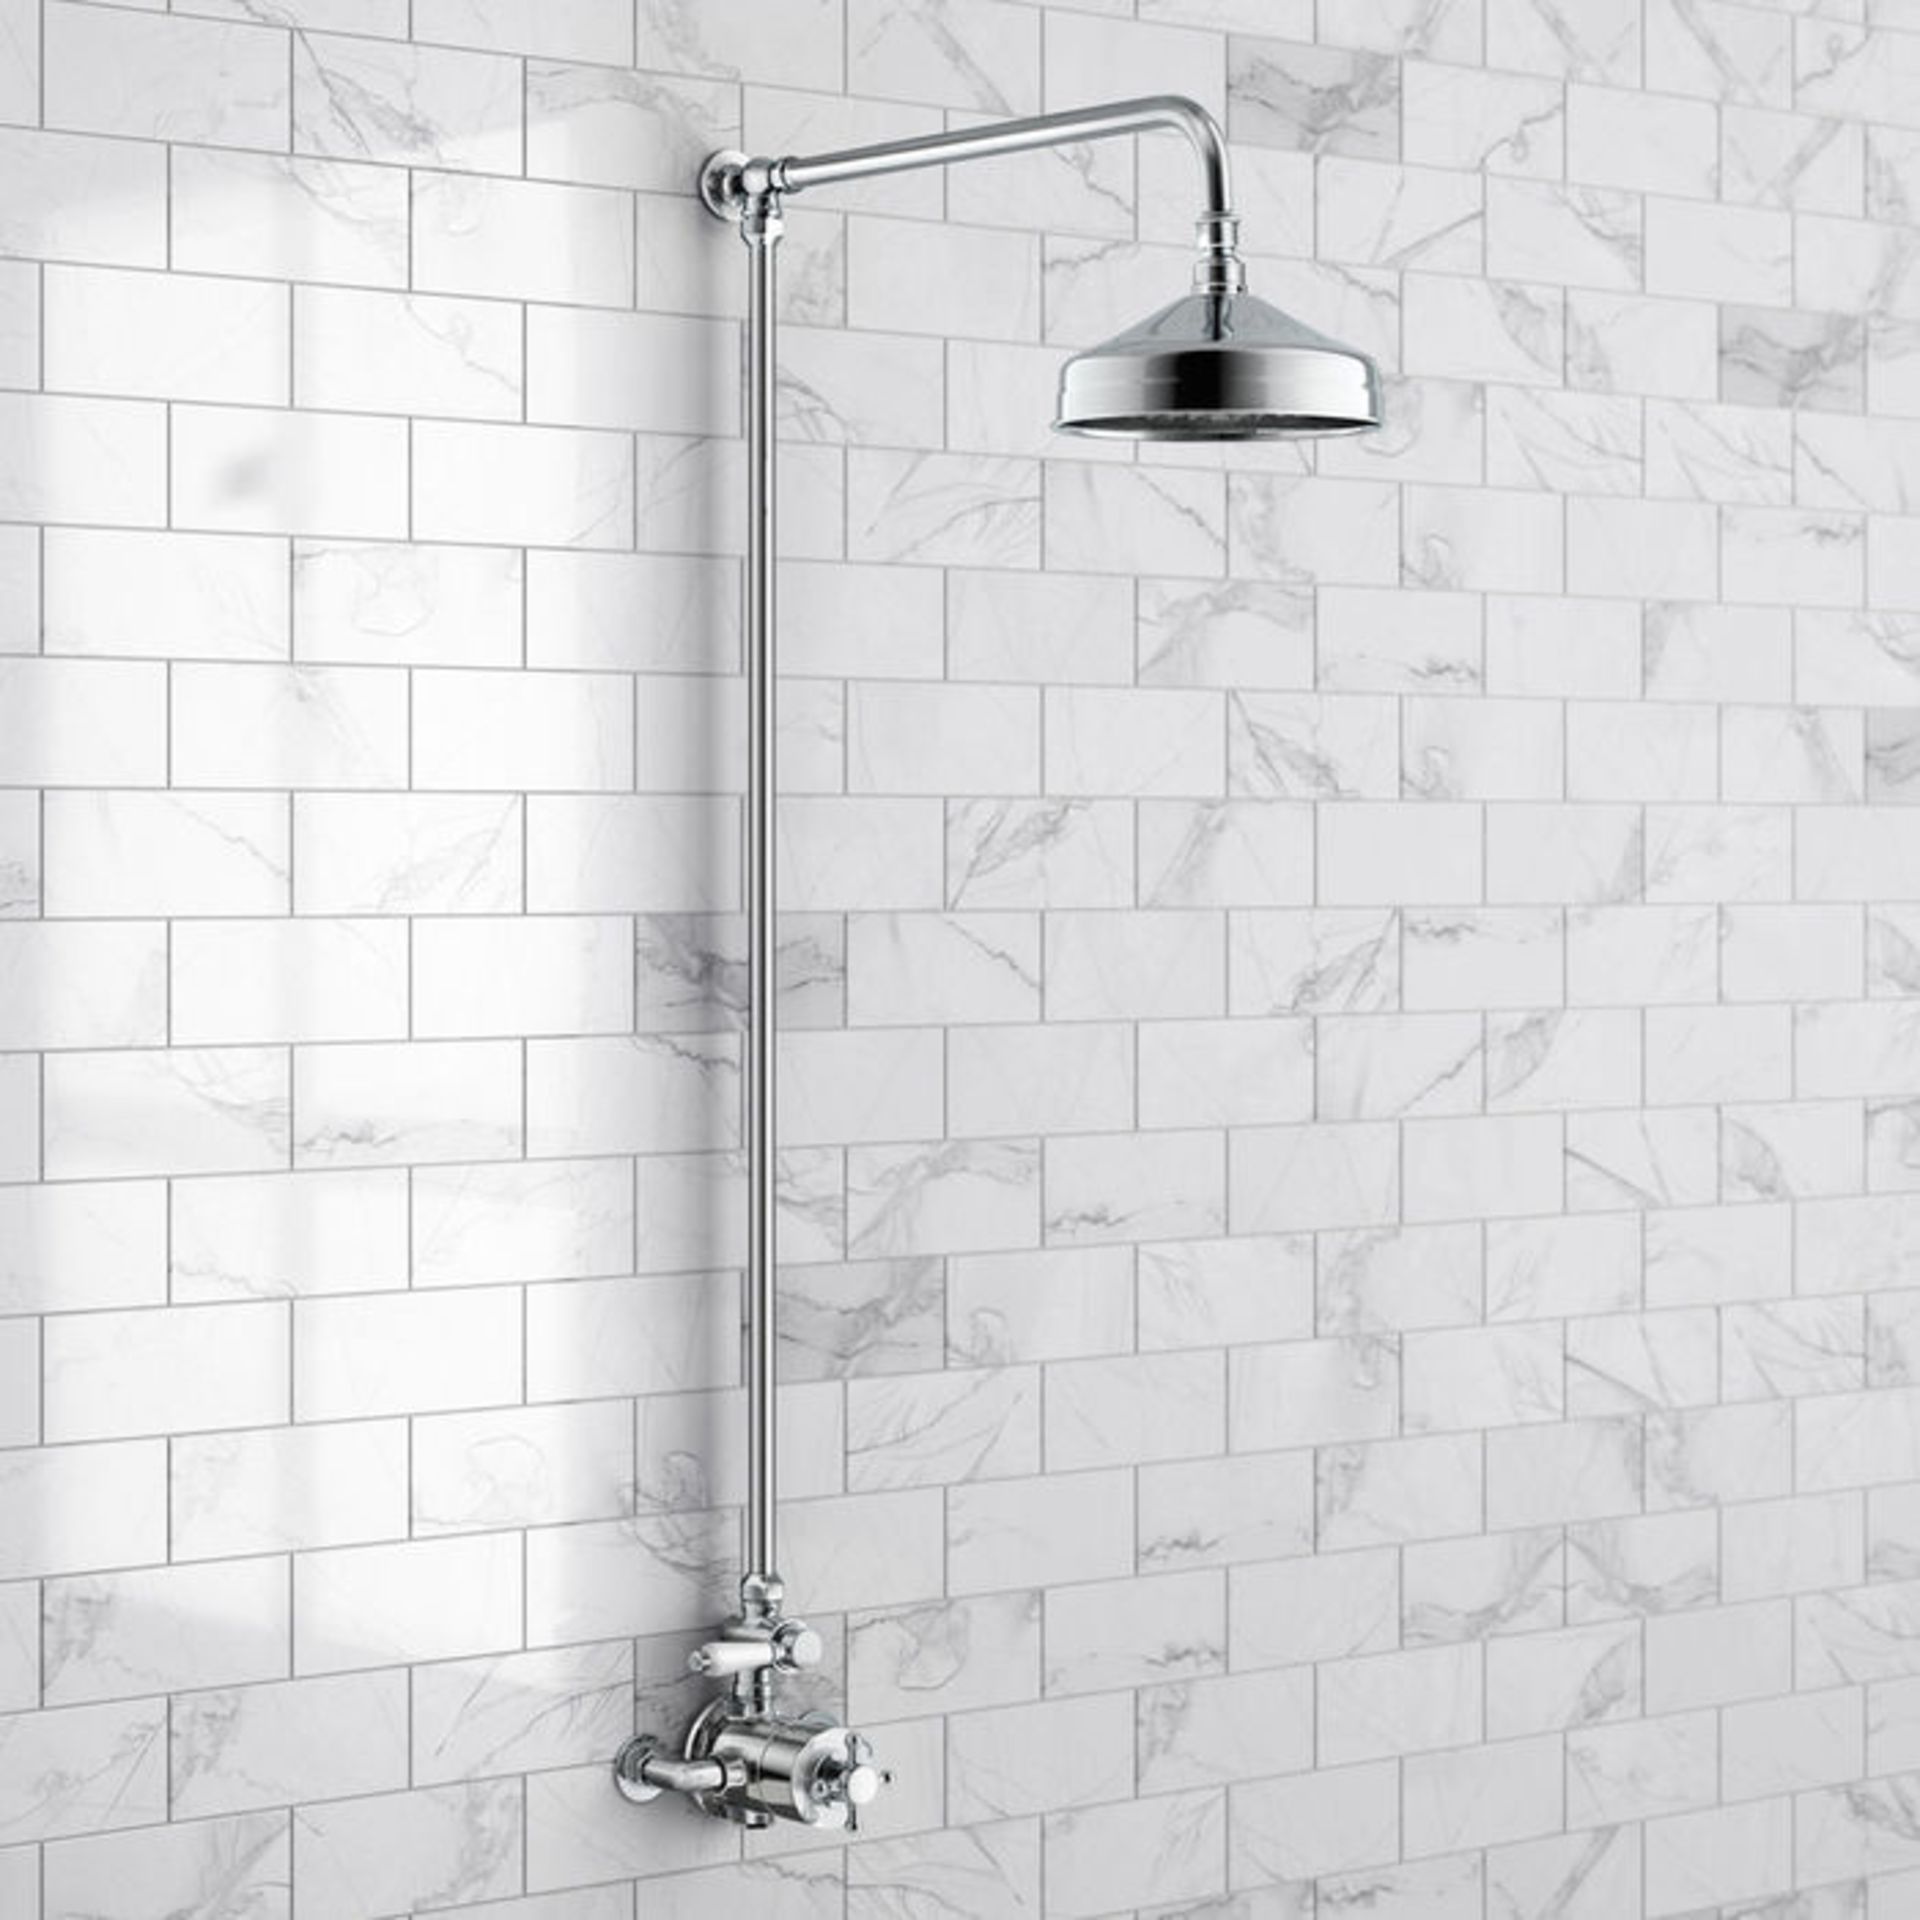 (MT222) Traditional Exposed Thermostatic Shower Kit & Medium Head. Traditional exposed valve - Image 3 of 3